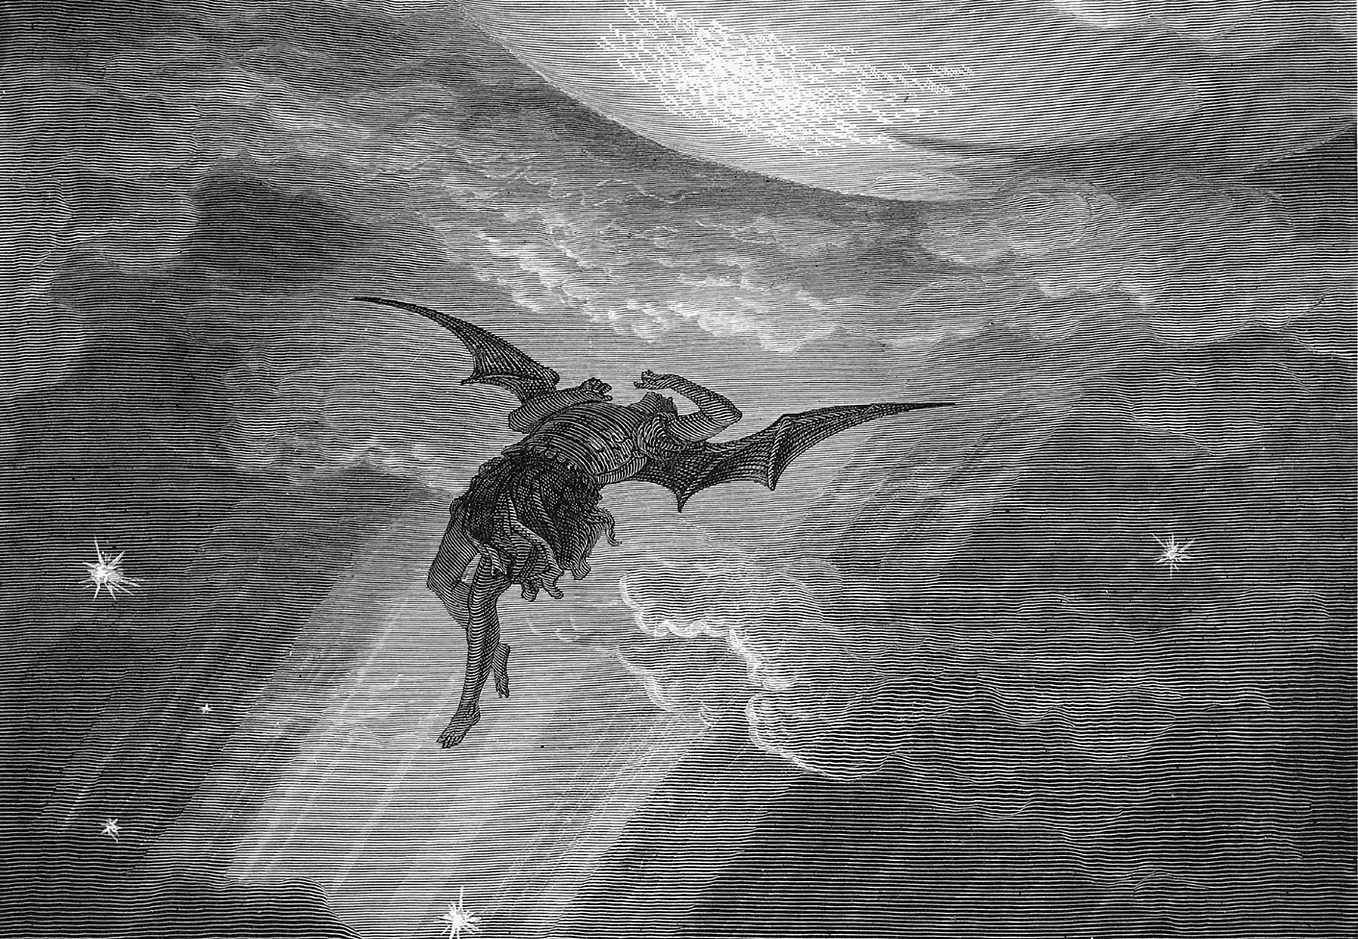 In the original piece by Gustav Doré, Lucifer is envisioned here falling from heaven. This version is vertically flipped so it showed Lucifer ascending from “heaven” as academics perceive “academia.” Lucifer/Satan is centered. He’s in the middle of transforming so he has a manlike body but his angelic wings are more pointed like that of a dragon.